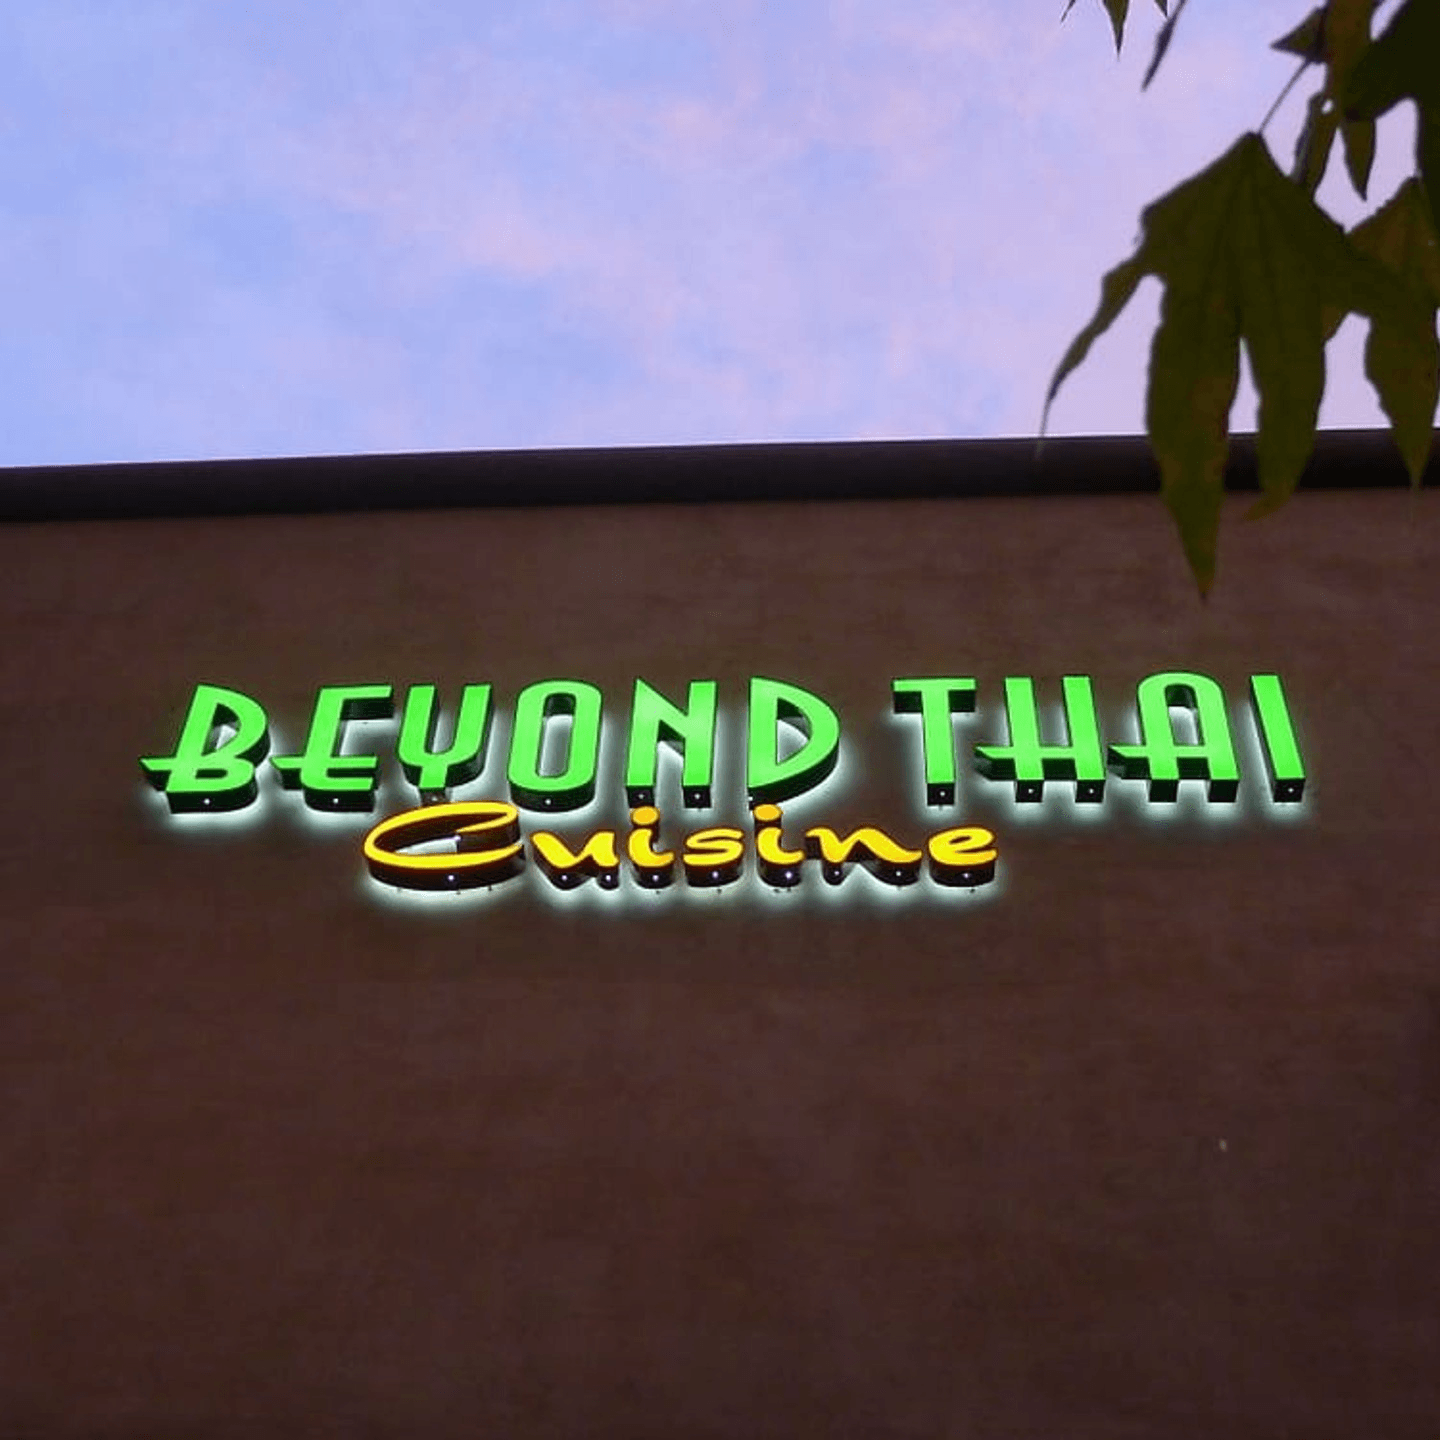 Welcome to Beyond Thai Cuisine